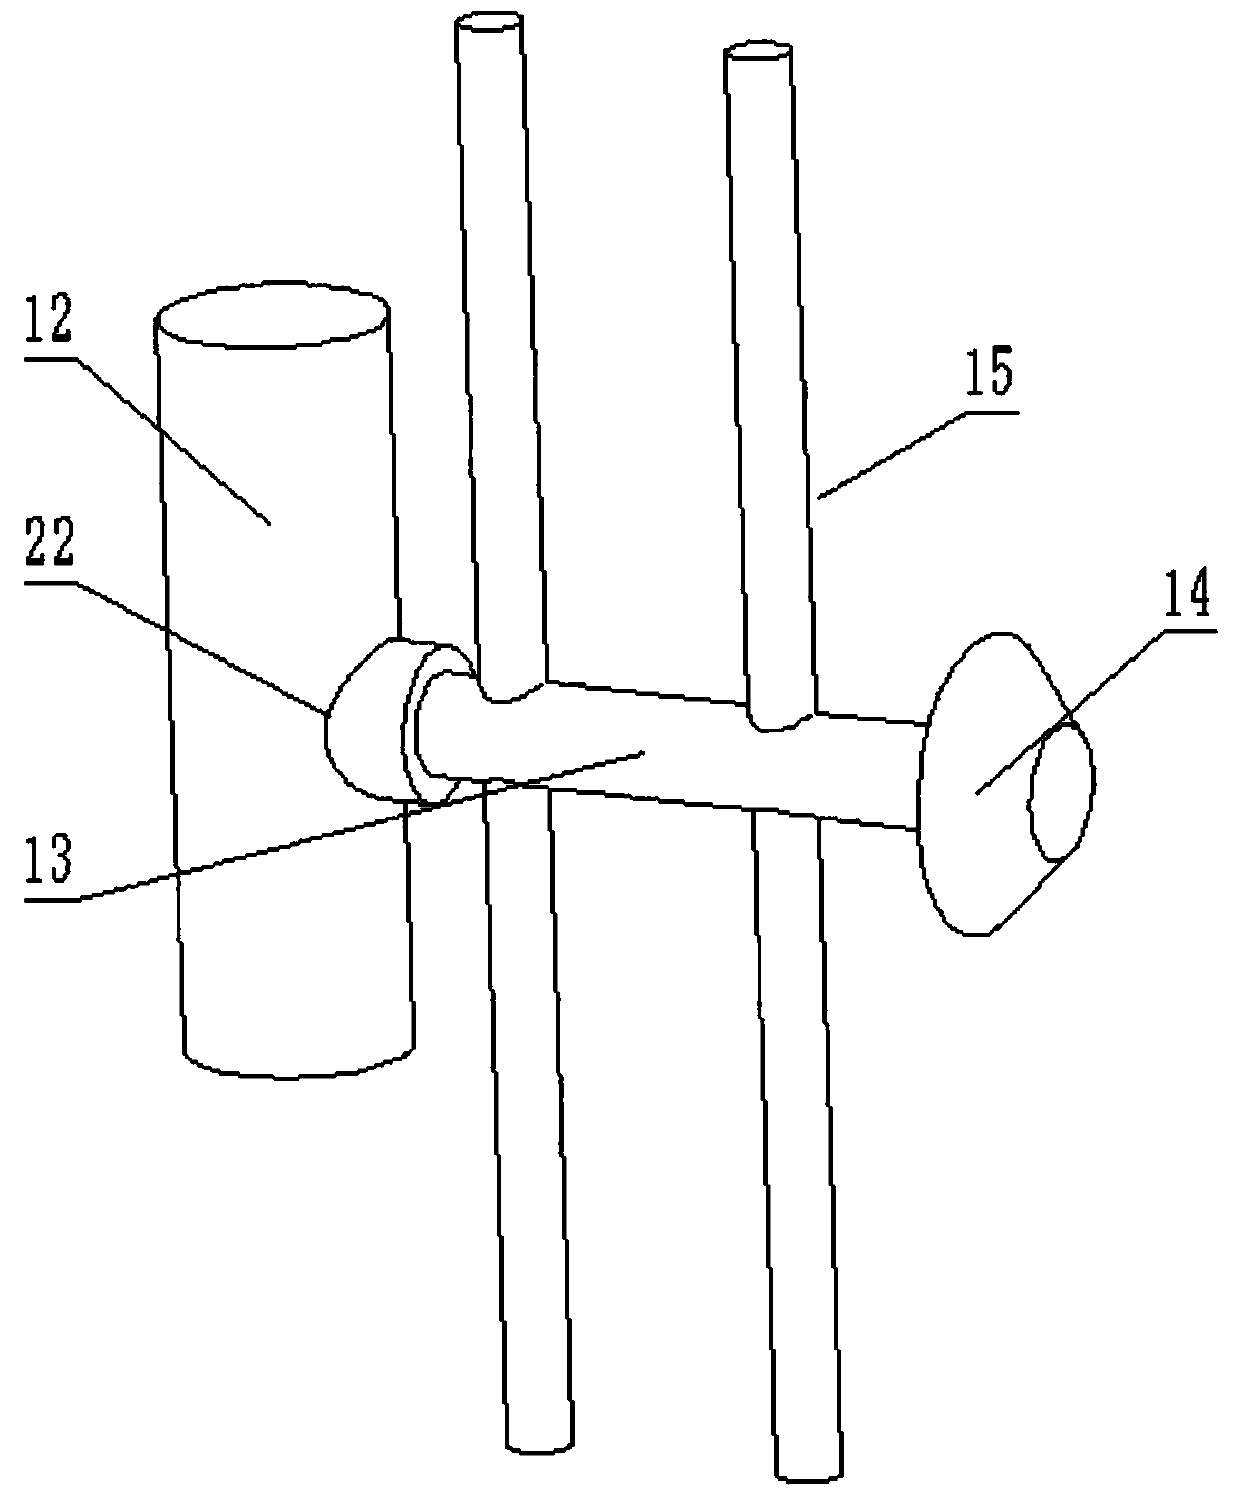 Chemical industry fermentation device capable of performing uniform stirring